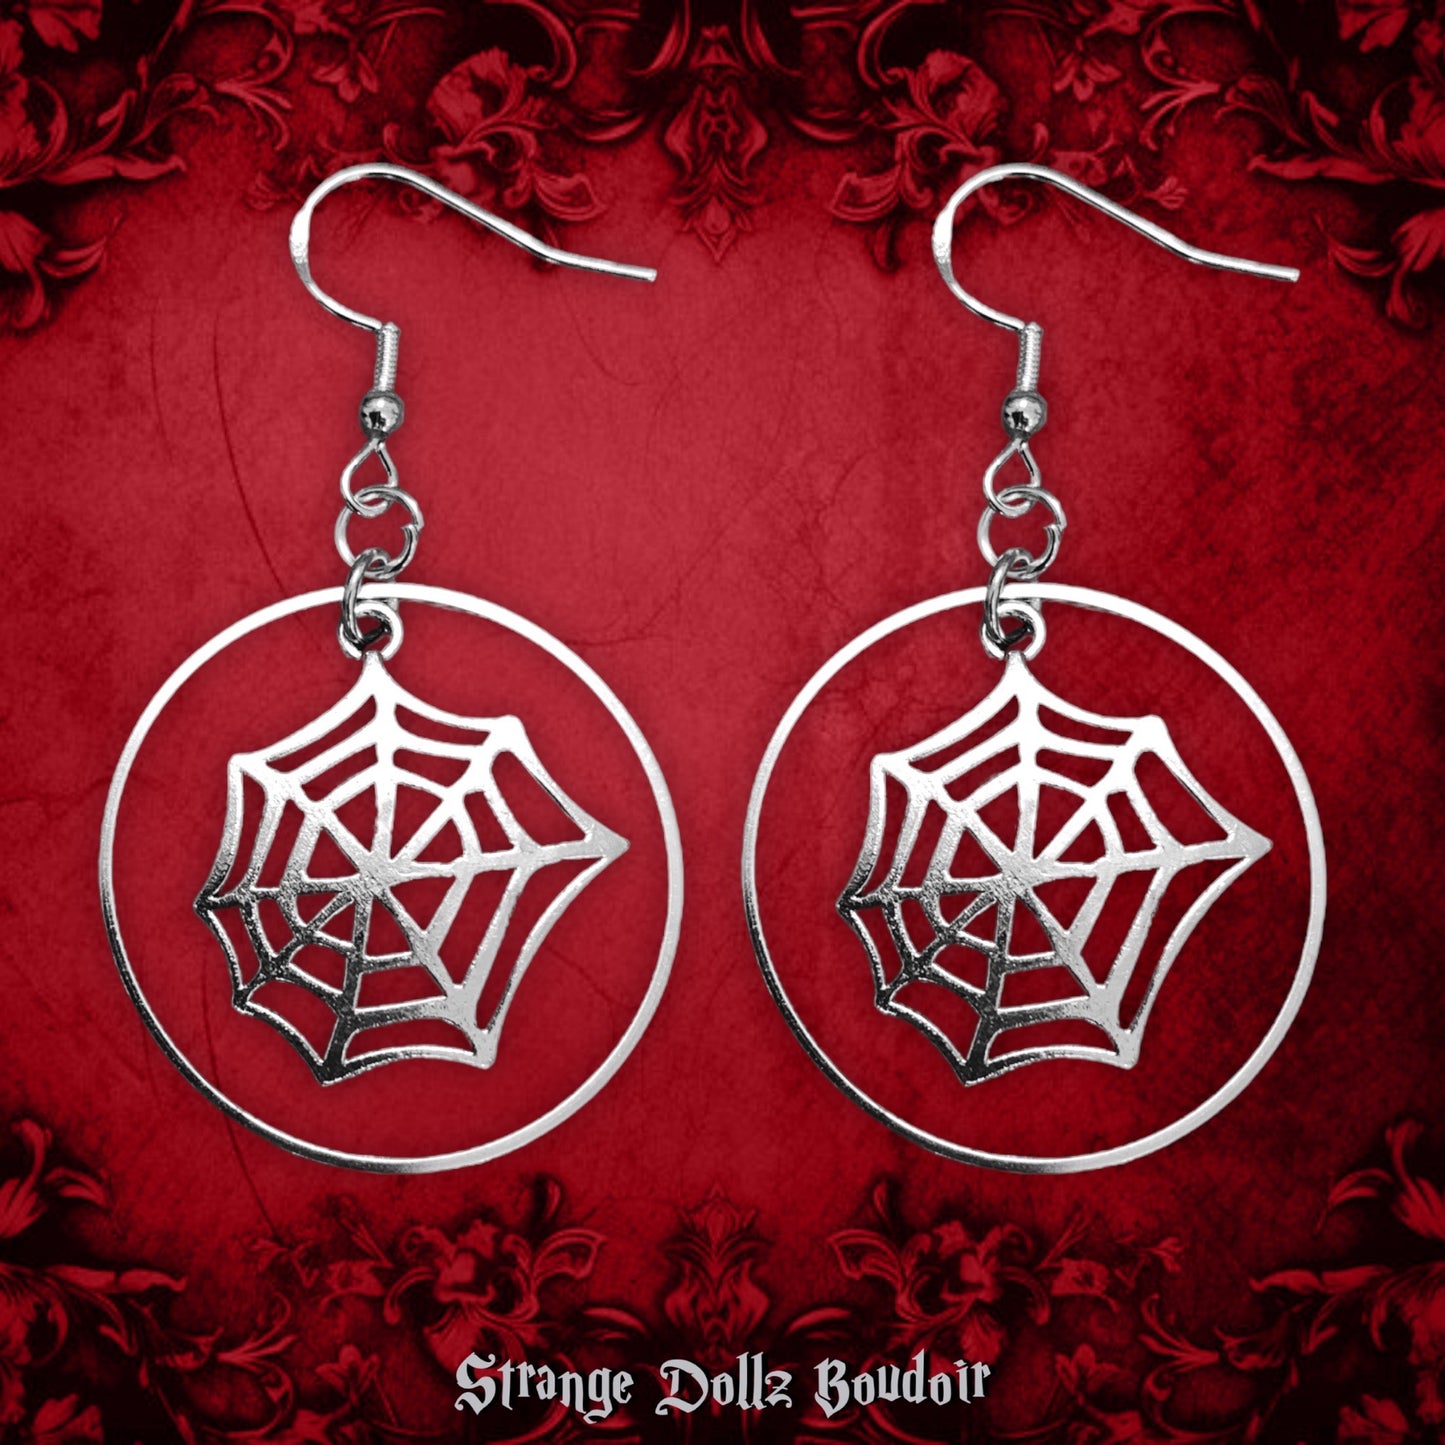 Ethereal Spiderweb Earrings,  925 Sterling Silver, Witchy Gothic, Strange Dollz Boudoir